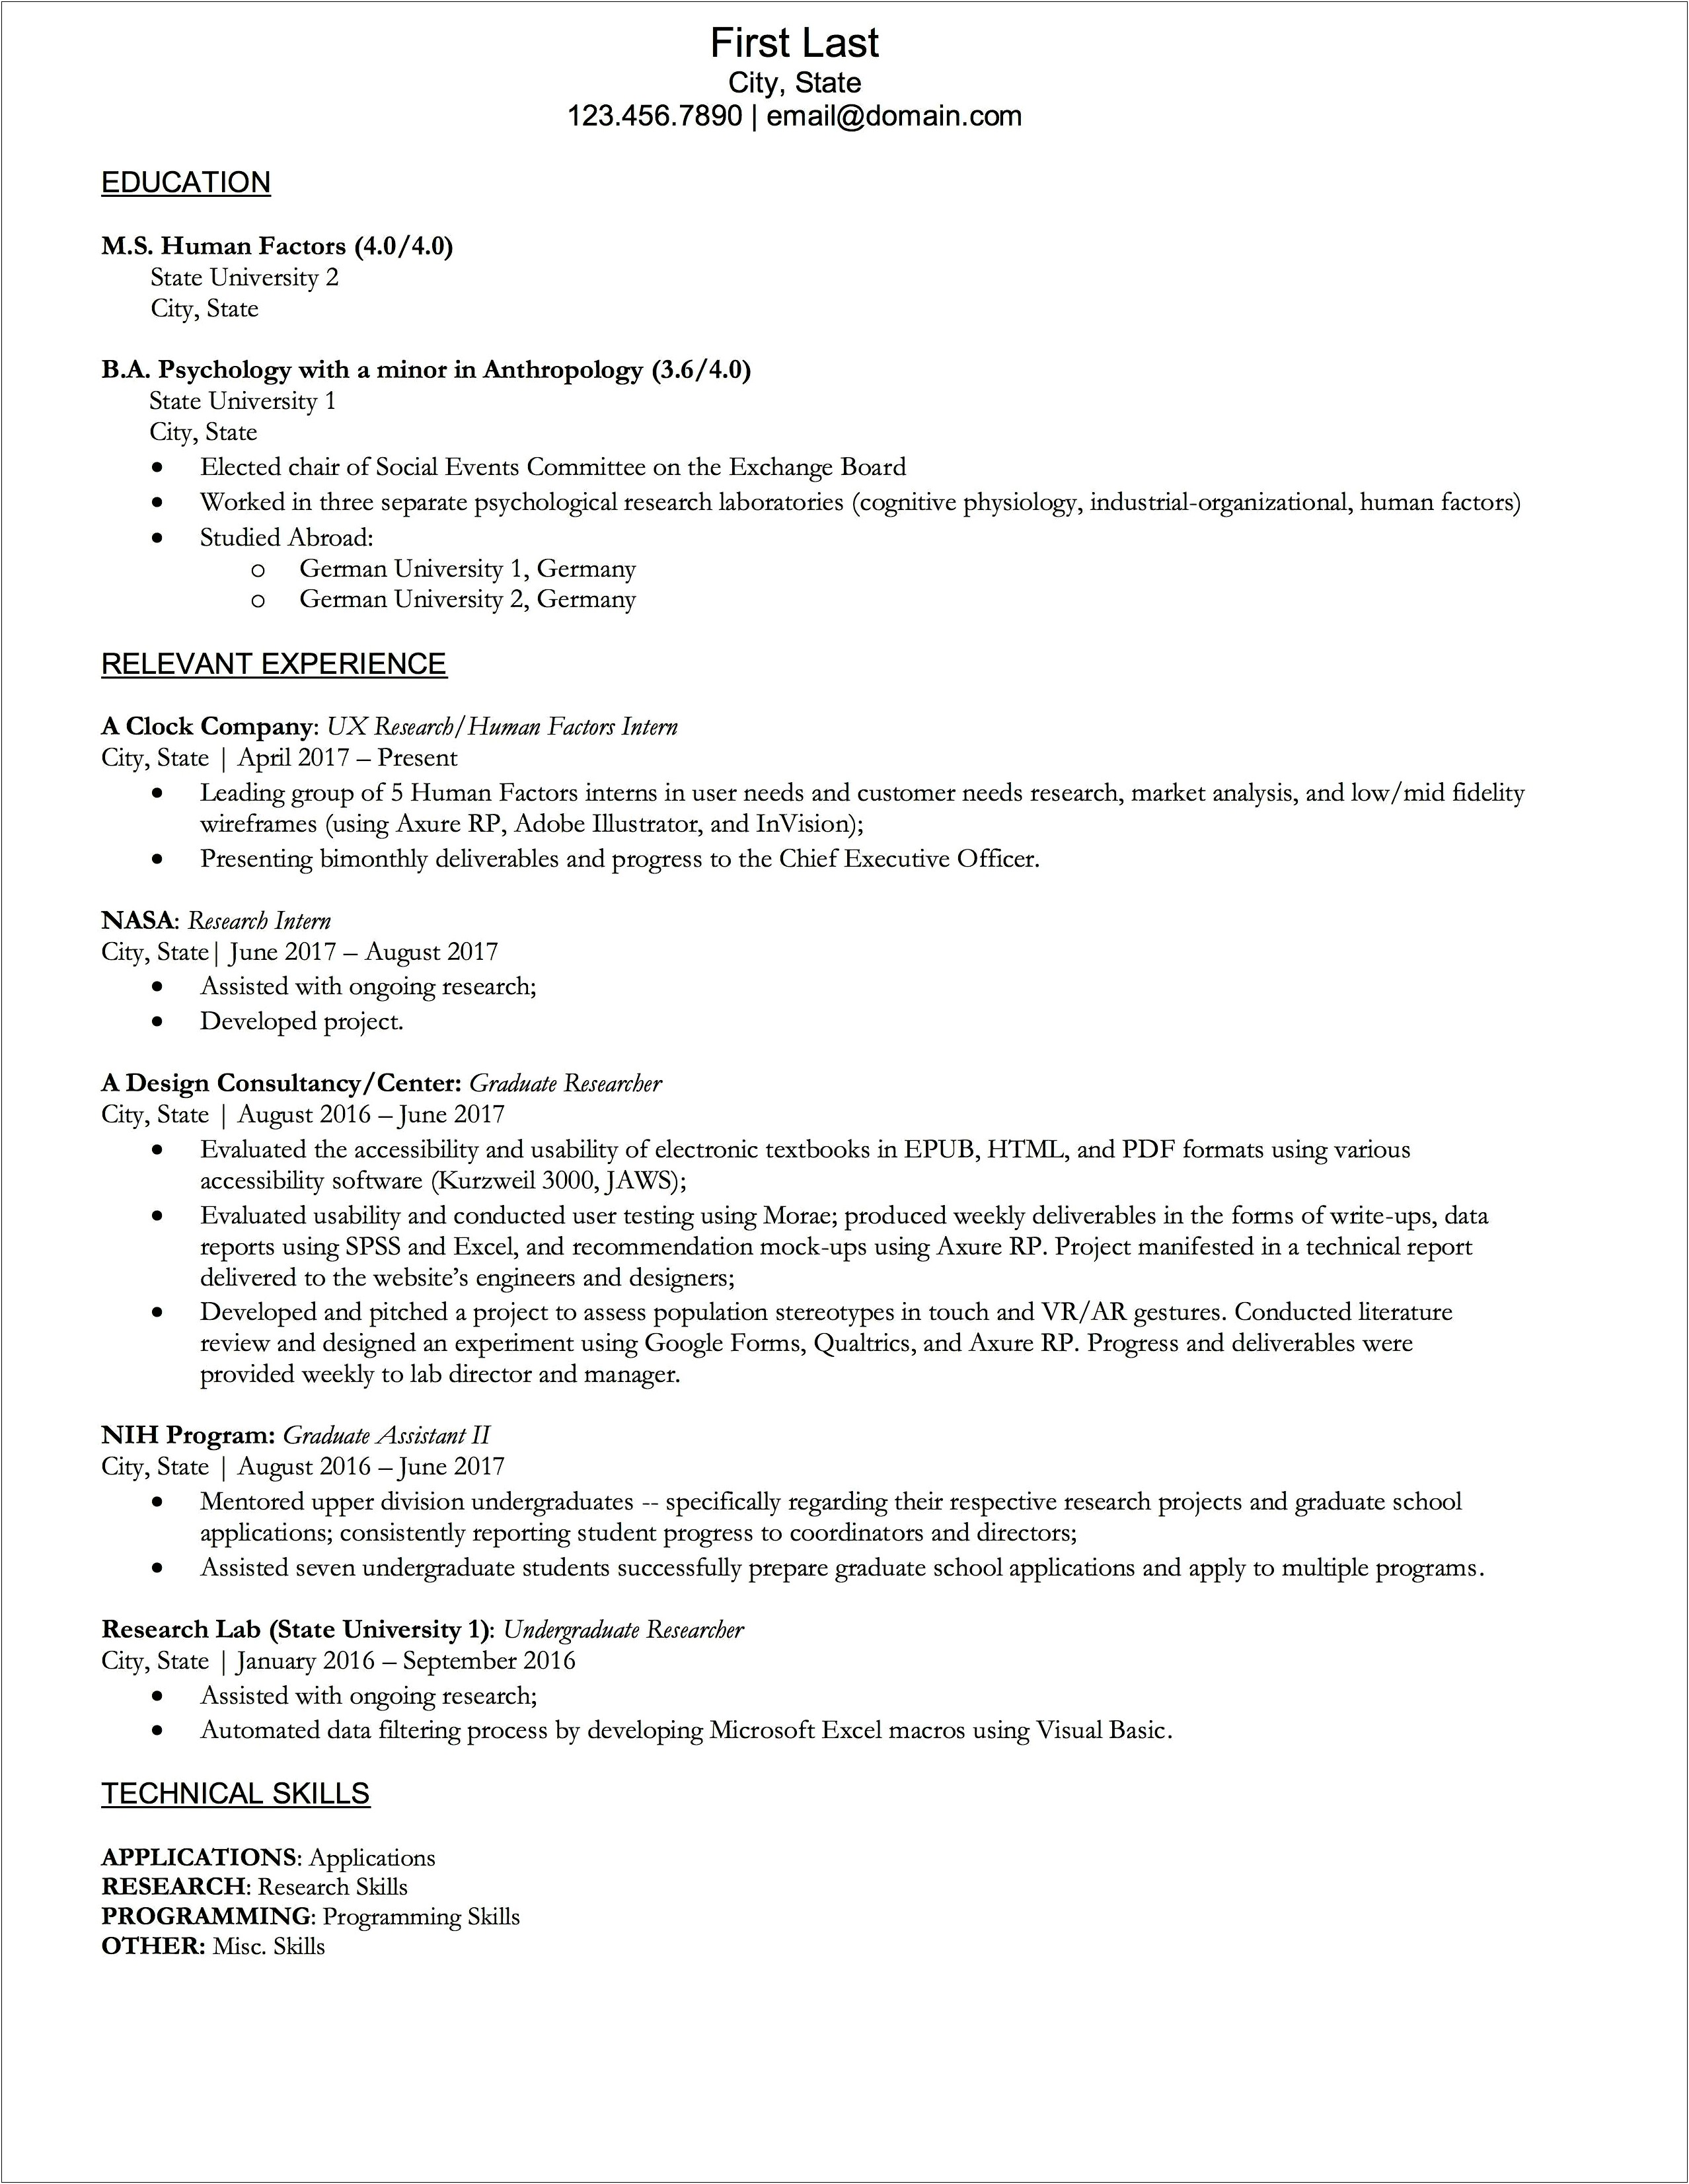 Graduate School Resume For Nontraditional Students